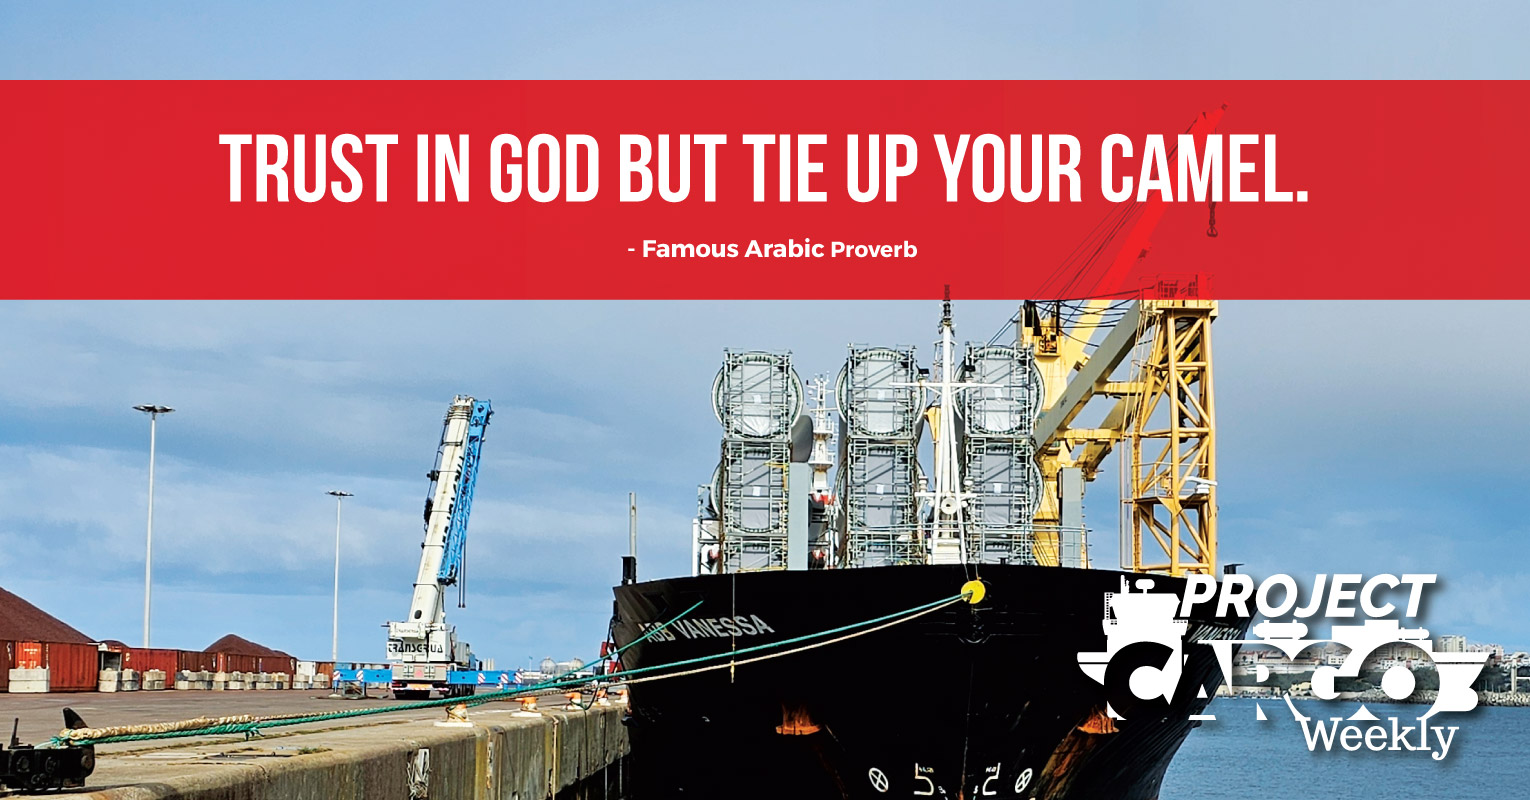 Trust in god but tie up your camel.